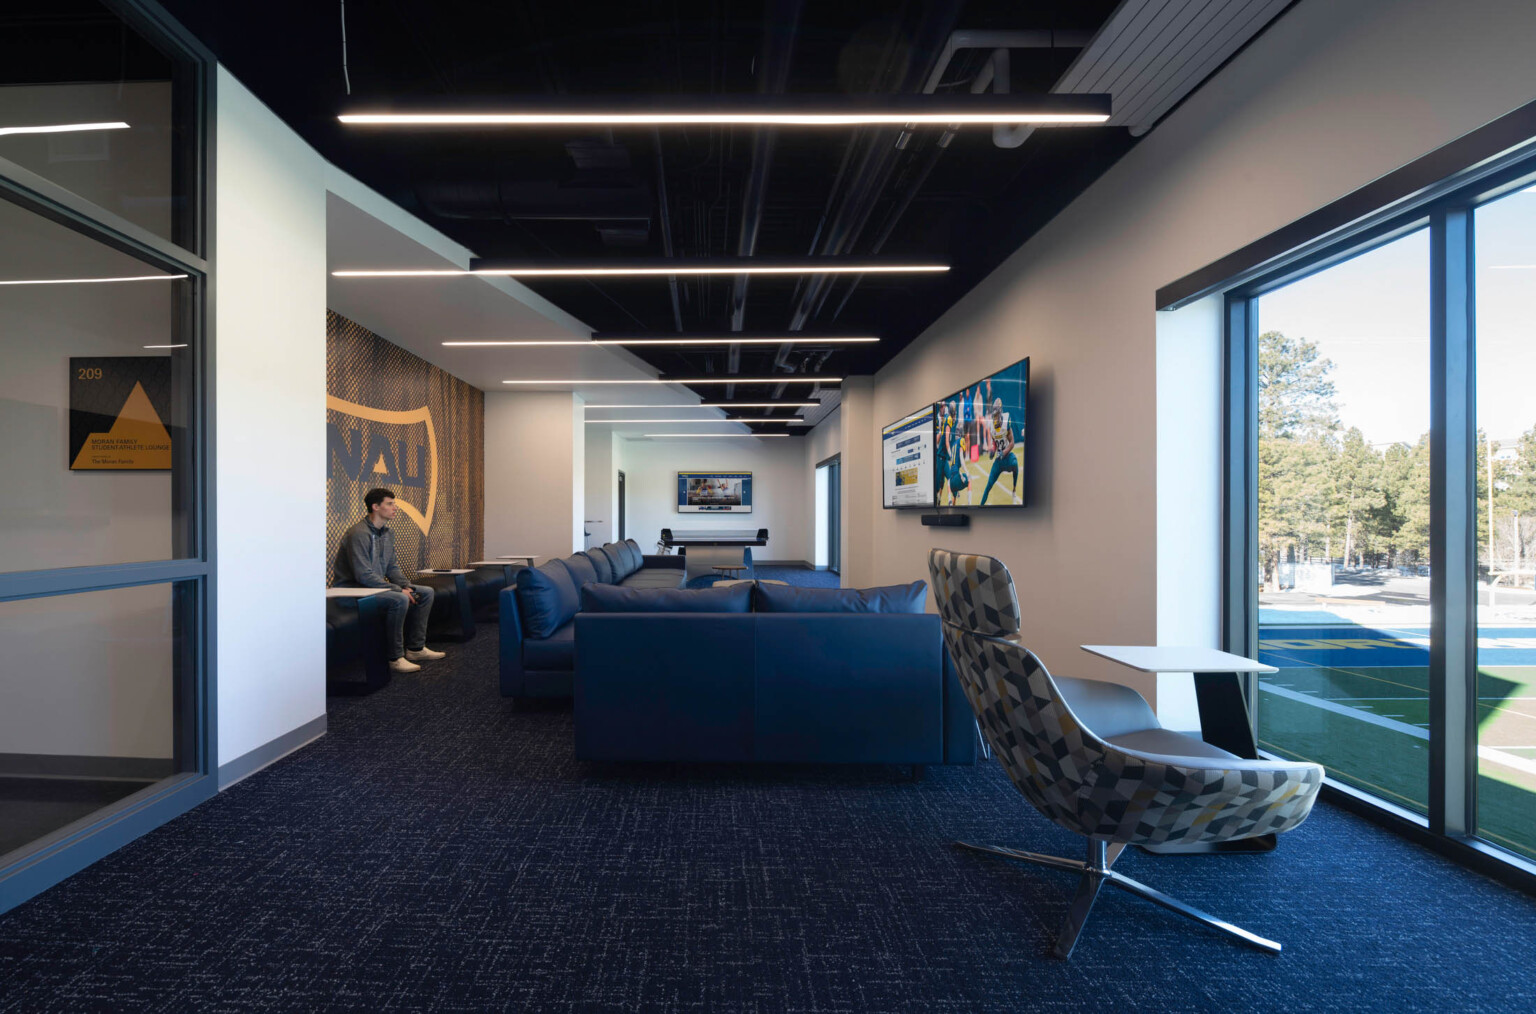 blue carpet, white and glass walls, a black ceiling and pendant lights with geometric upholstered chair and blue leather sofas